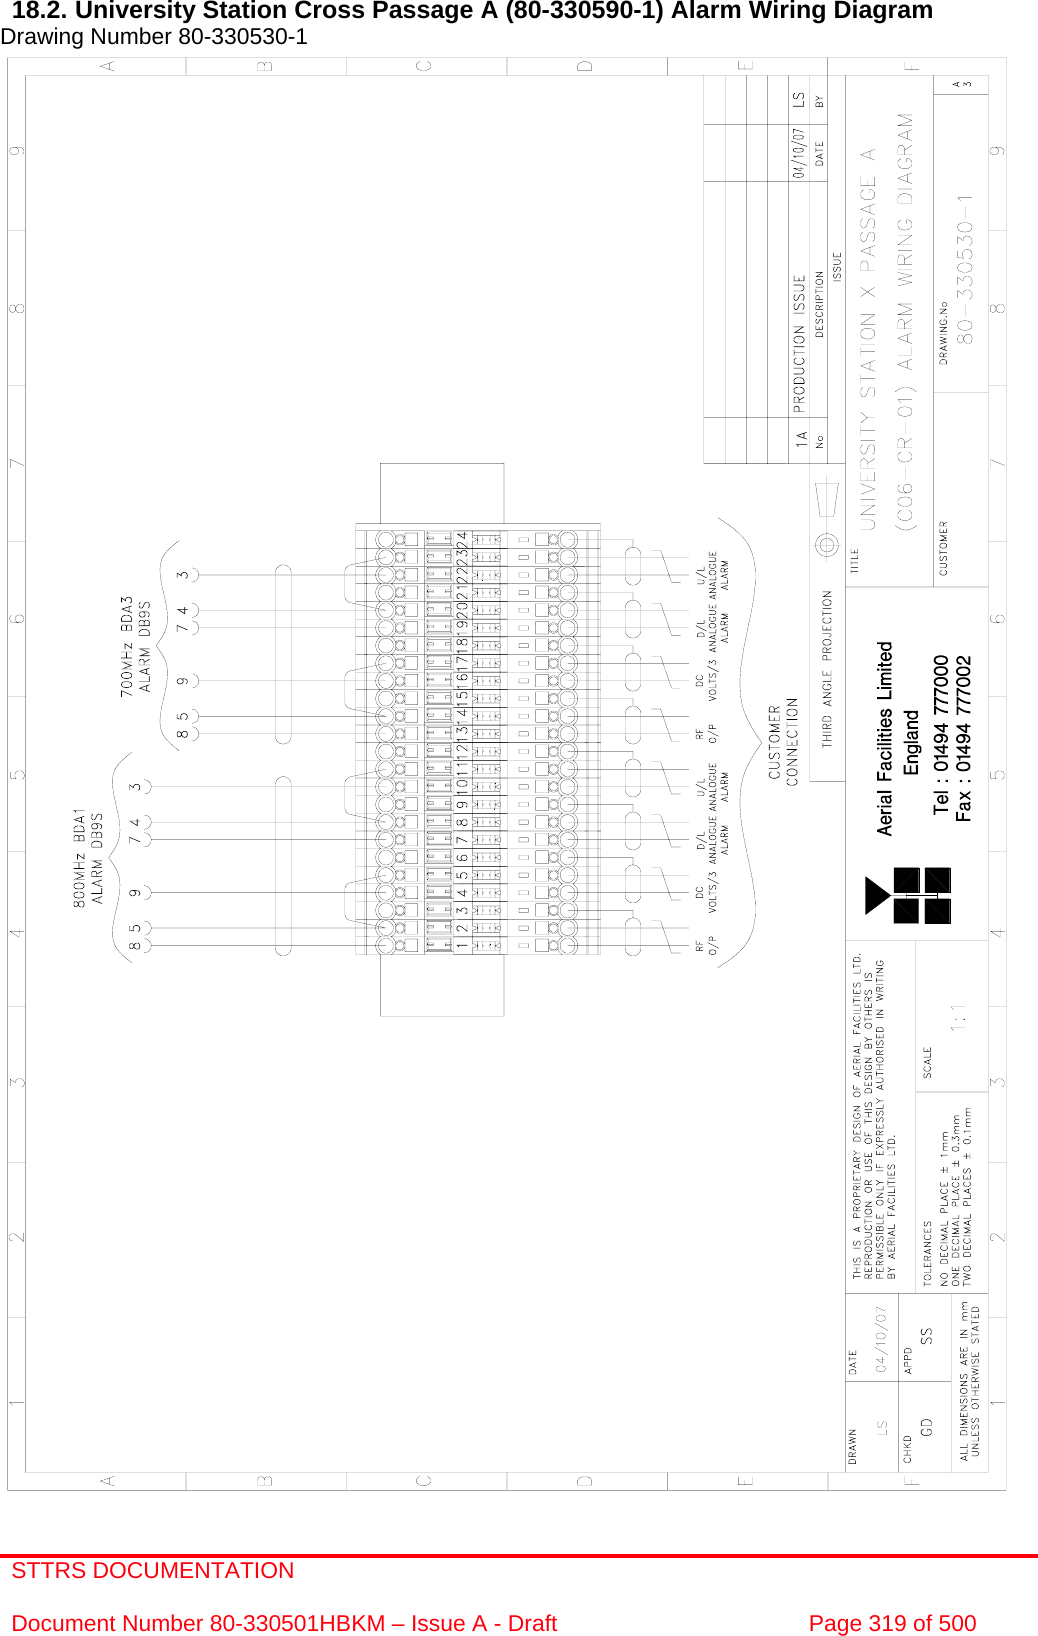 STTRS DOCUMENTATION  Document Number 80-330501HBKM – Issue A - Draft  Page 319 of 500   18.2. University Station Cross Passage A (80-330590-1) Alarm Wiring Diagram Drawing Number 80-330530-1                                                        